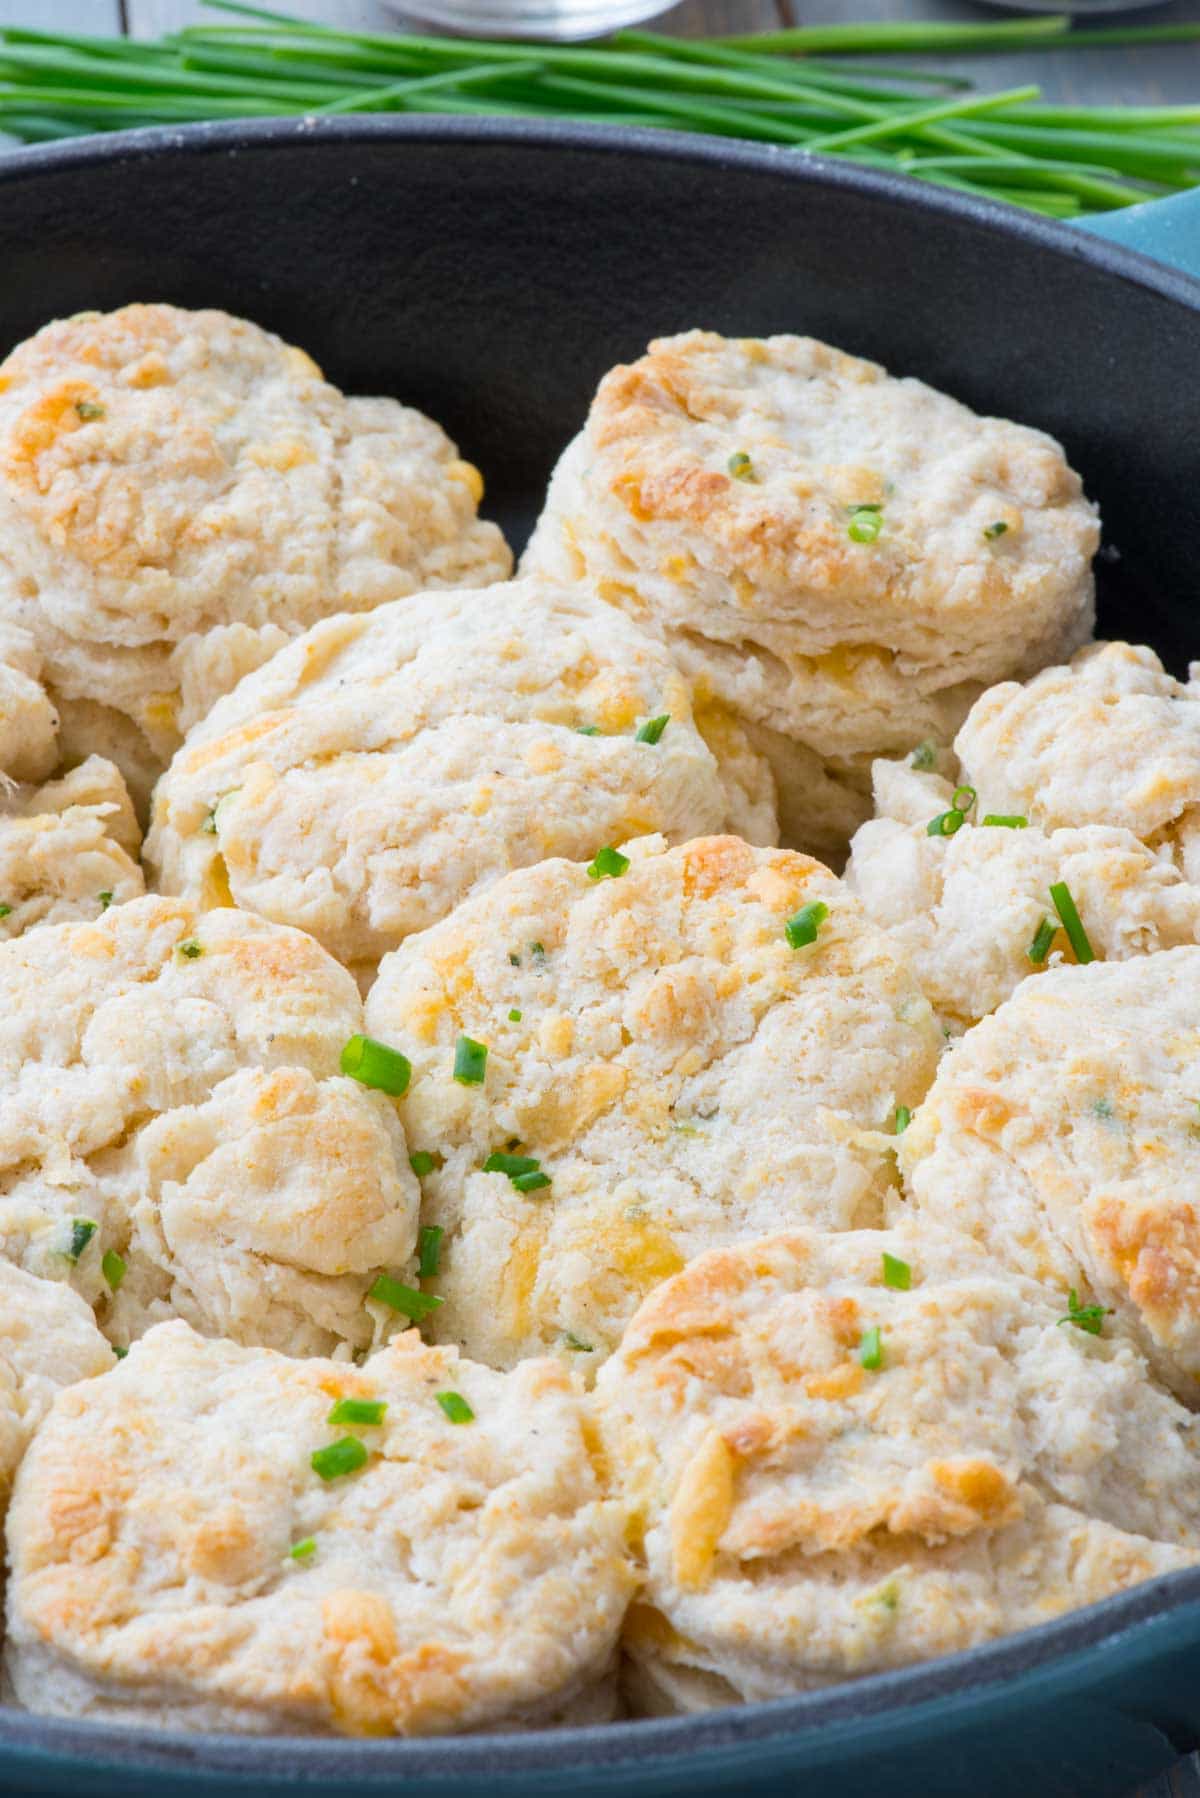 Cheddar Chive Biscuits - this easy buttermilk biscuit recipe is FULL of cheddar cheese and chives! We eat them for breakfast with bacon or as a side dish with dinner!